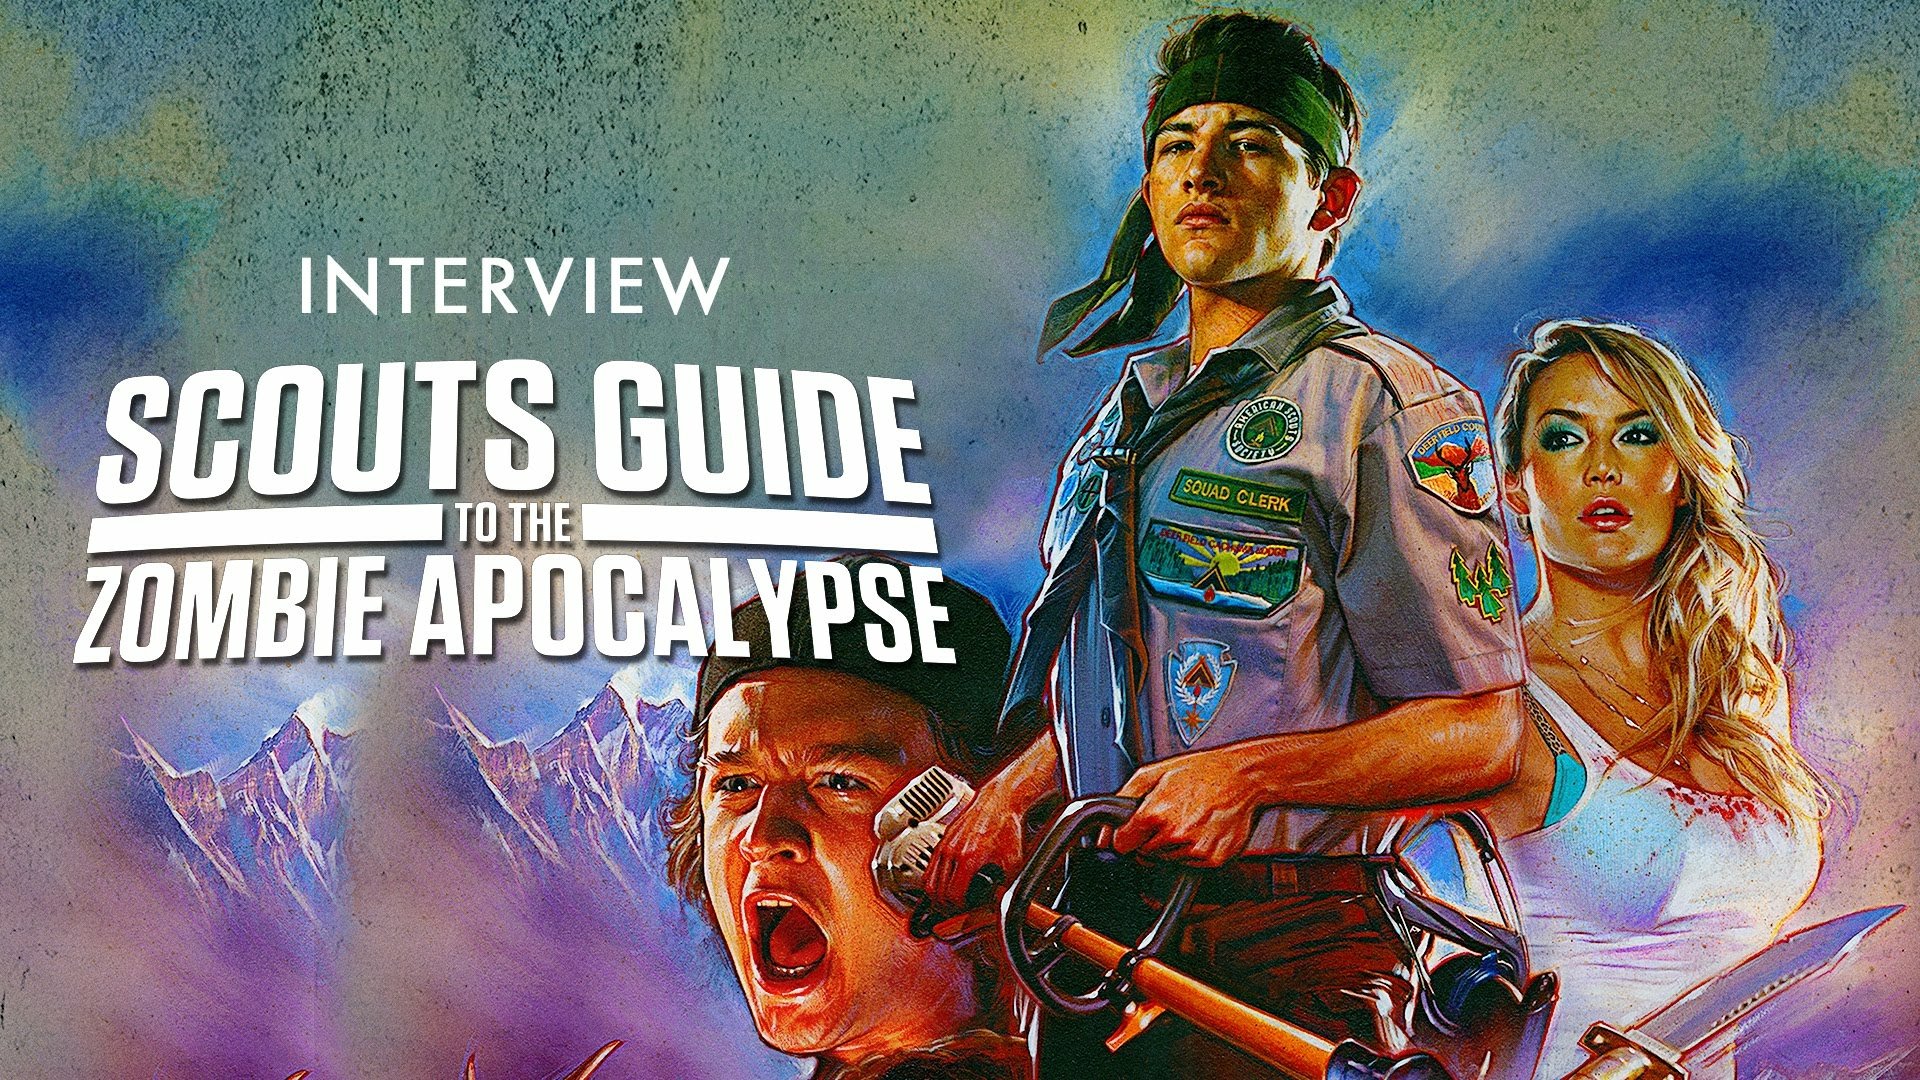 Scouts Guide to the Zombie Apocalypse HD Wallpaper